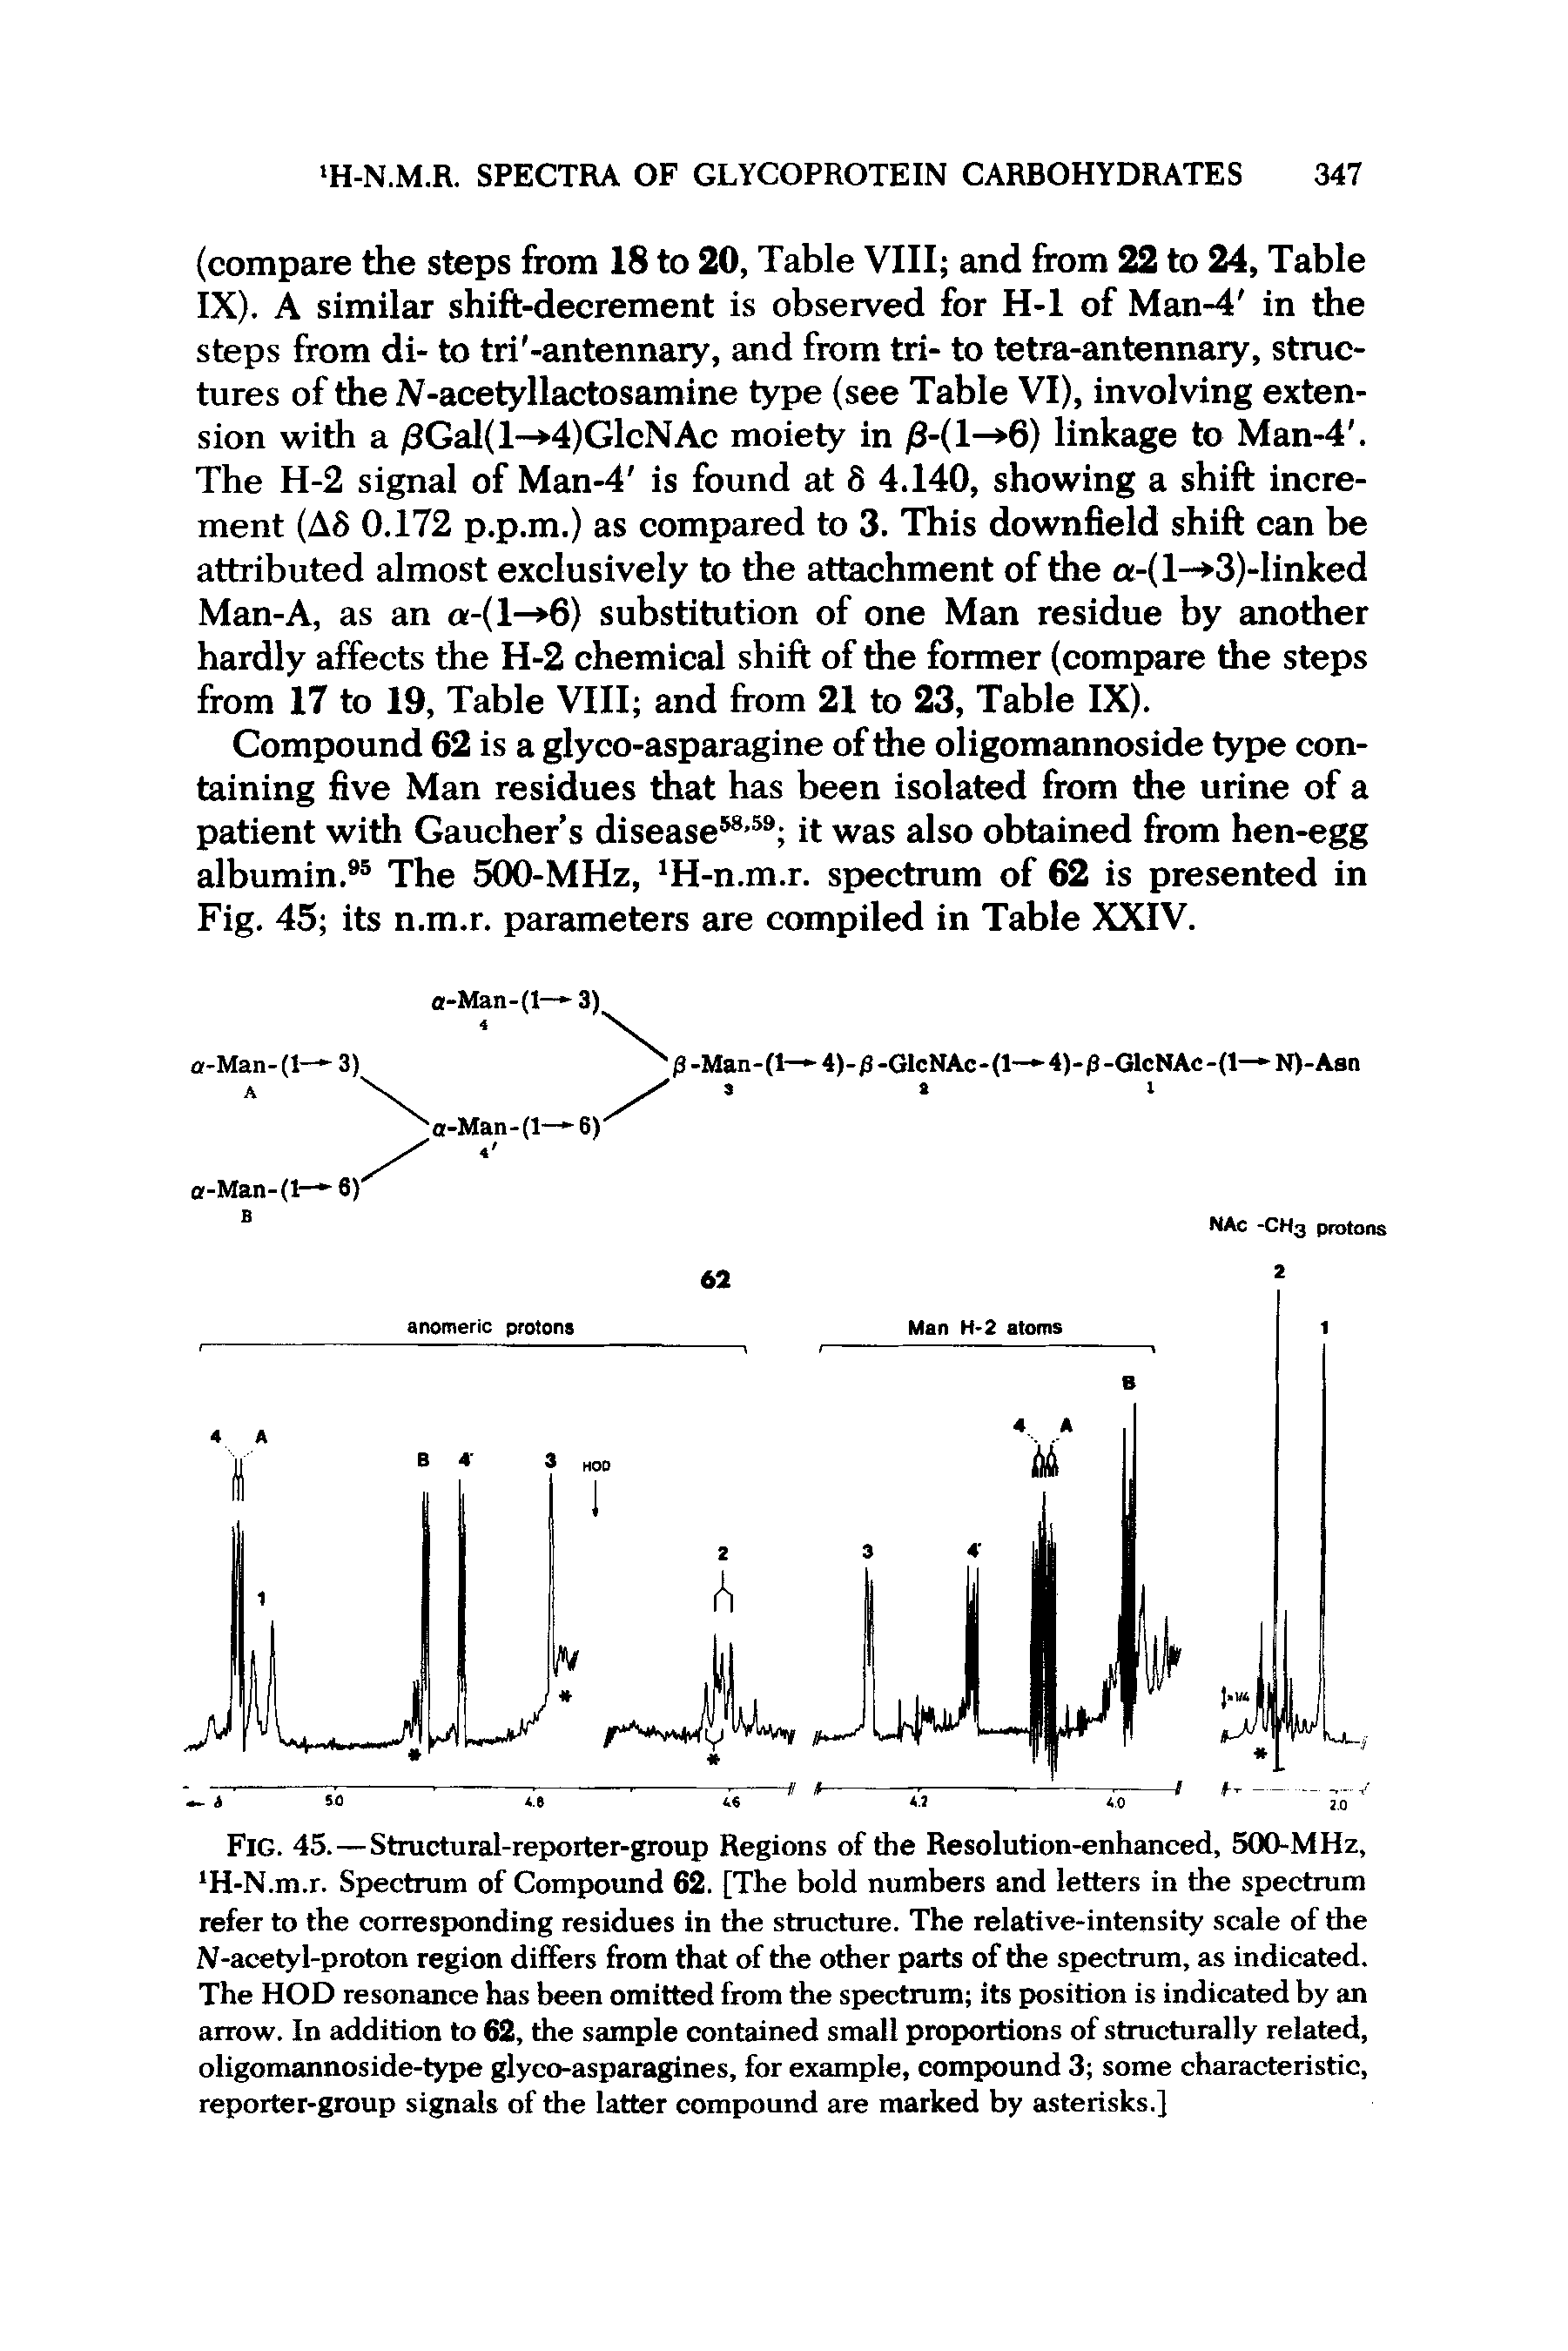 Fig. 45. — Structural-reporter-group Regions of the Resolution-enhanced, 500-MHz, H-N.m.r. Spectrum of Compound 62. [The bold numbers and letters in the spectrum refer to the corresponding residues in the structure. The relative-intensity scale of the N-acetyl-proton region differs from that of the other parts of the spectrum, as indicated. The HOD resonance has been omitted from the spectrum its position is indicated by an arrow. In addition to 62, the sample contained small proportions of structurally related, oligomannoside-type glyco-asparagines, for example, compound 3 some characteristic, reporter-group signals of the latter compound are marked by asterisks.]...